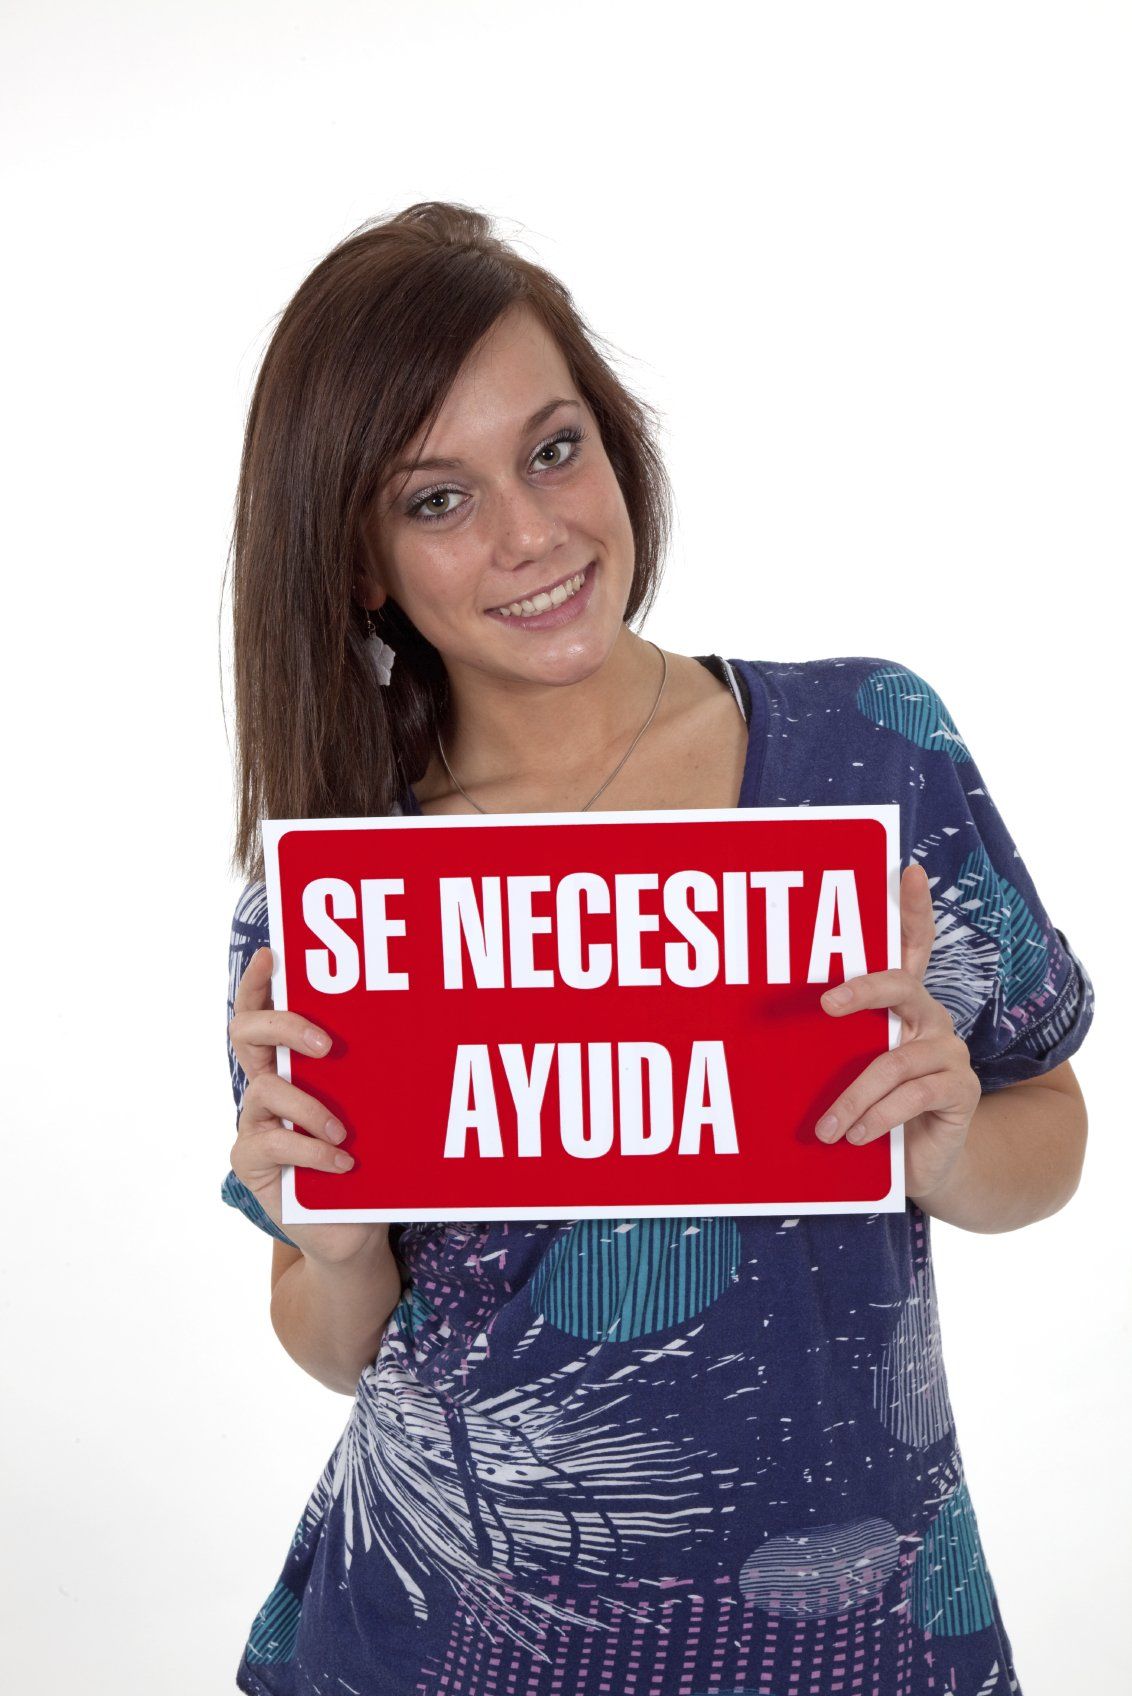 Smiling young lady, standing and holding a sign written in Spanish